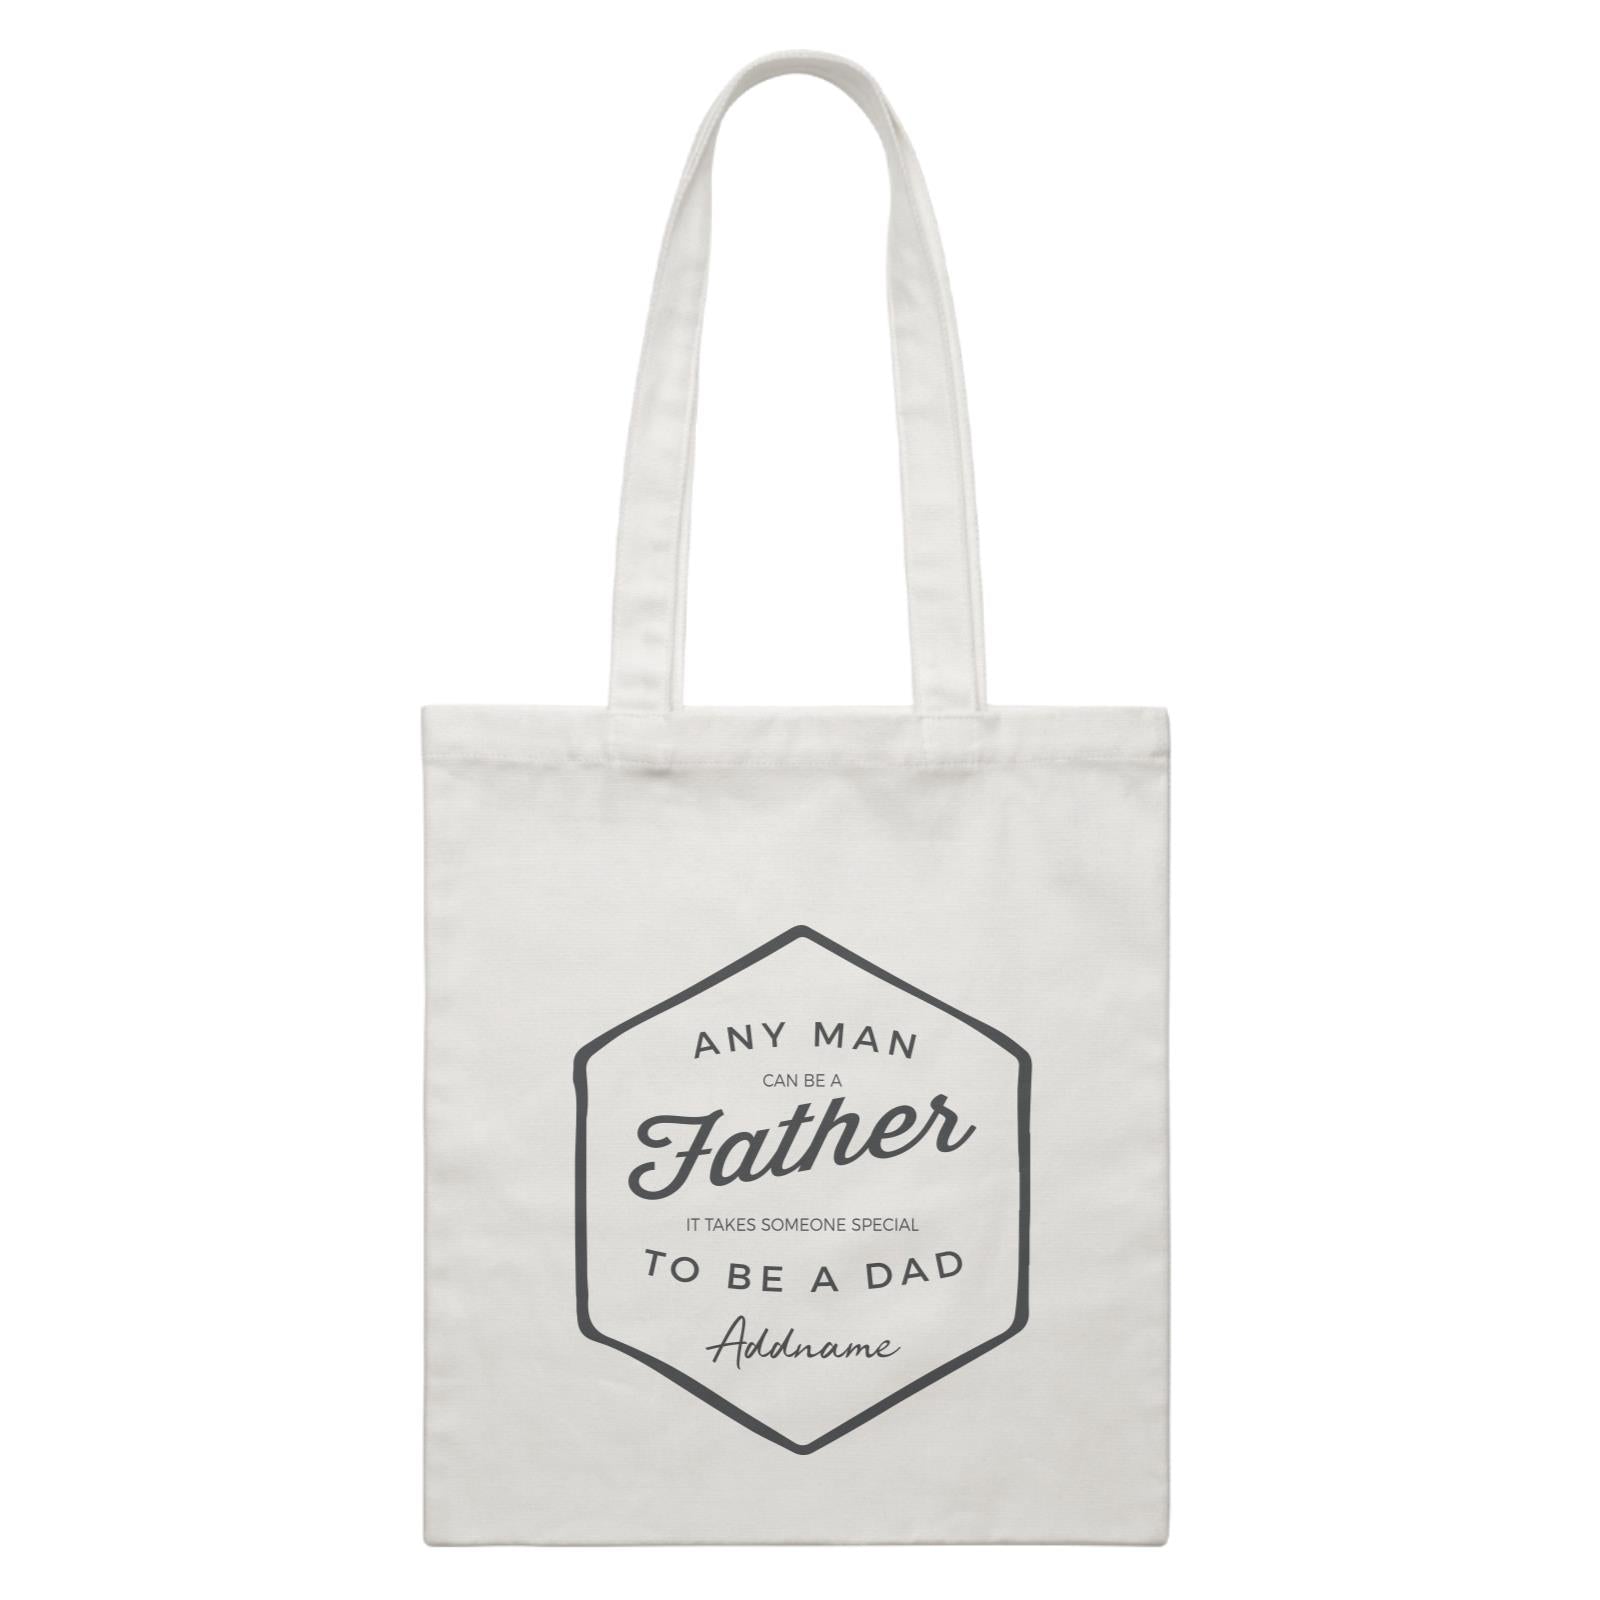 Dad Badge Any Man Can Be A Father Addname White Canvas Bag